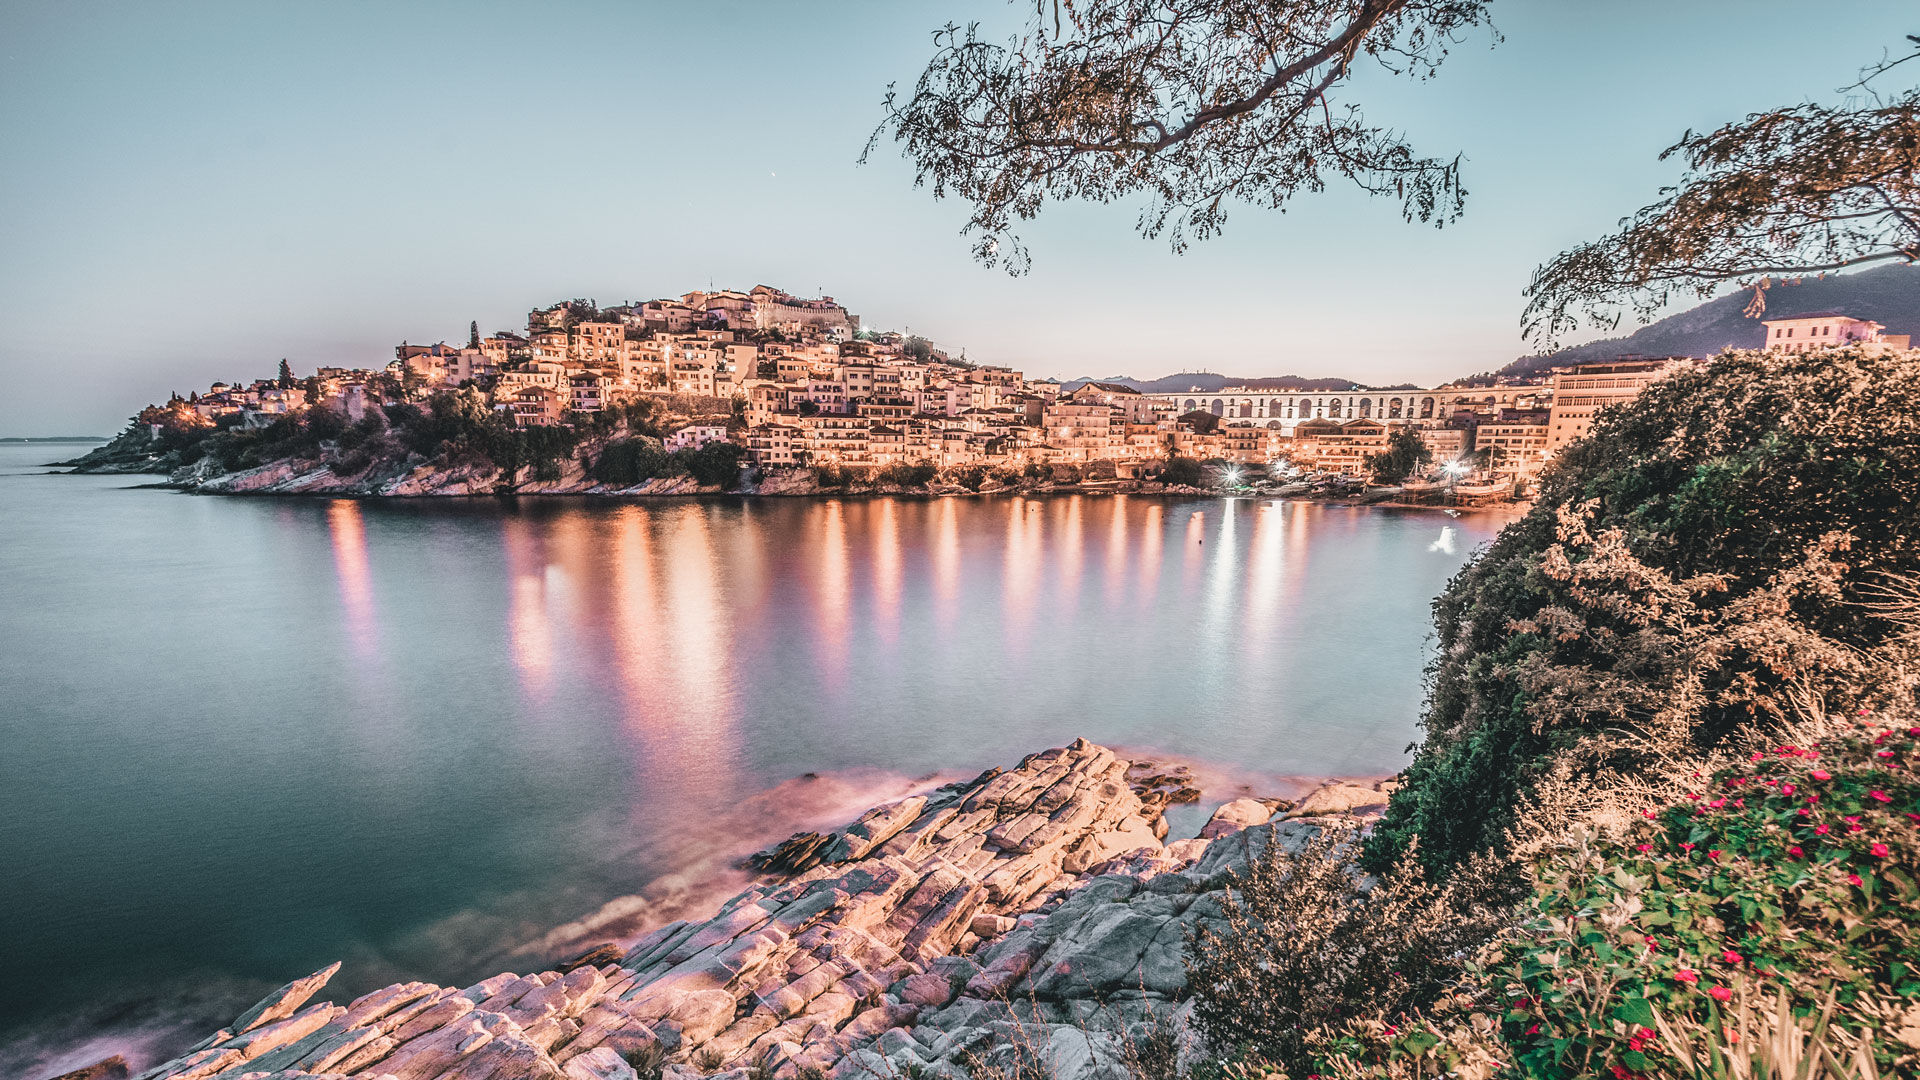 Night view of Kavala's Acropolis, Old Town and Kamares